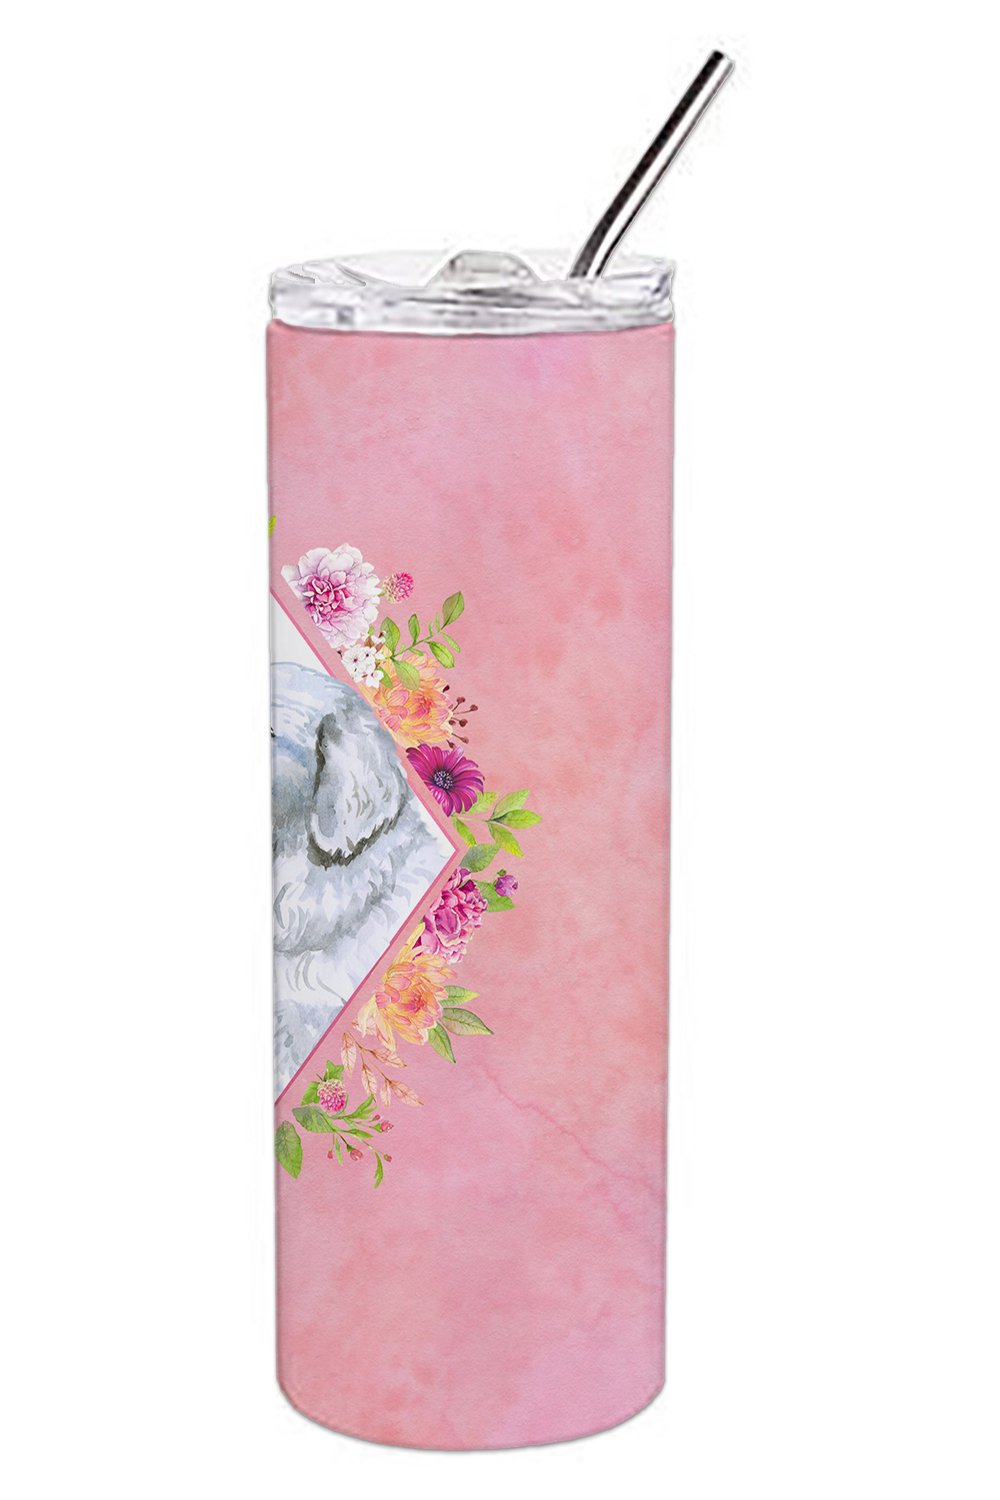 Great Pyrenees Pink Flowers Double Walled Stainless Steel 20 oz Skinny Tumbler CK4160TBL20 by Caroline's Treasures